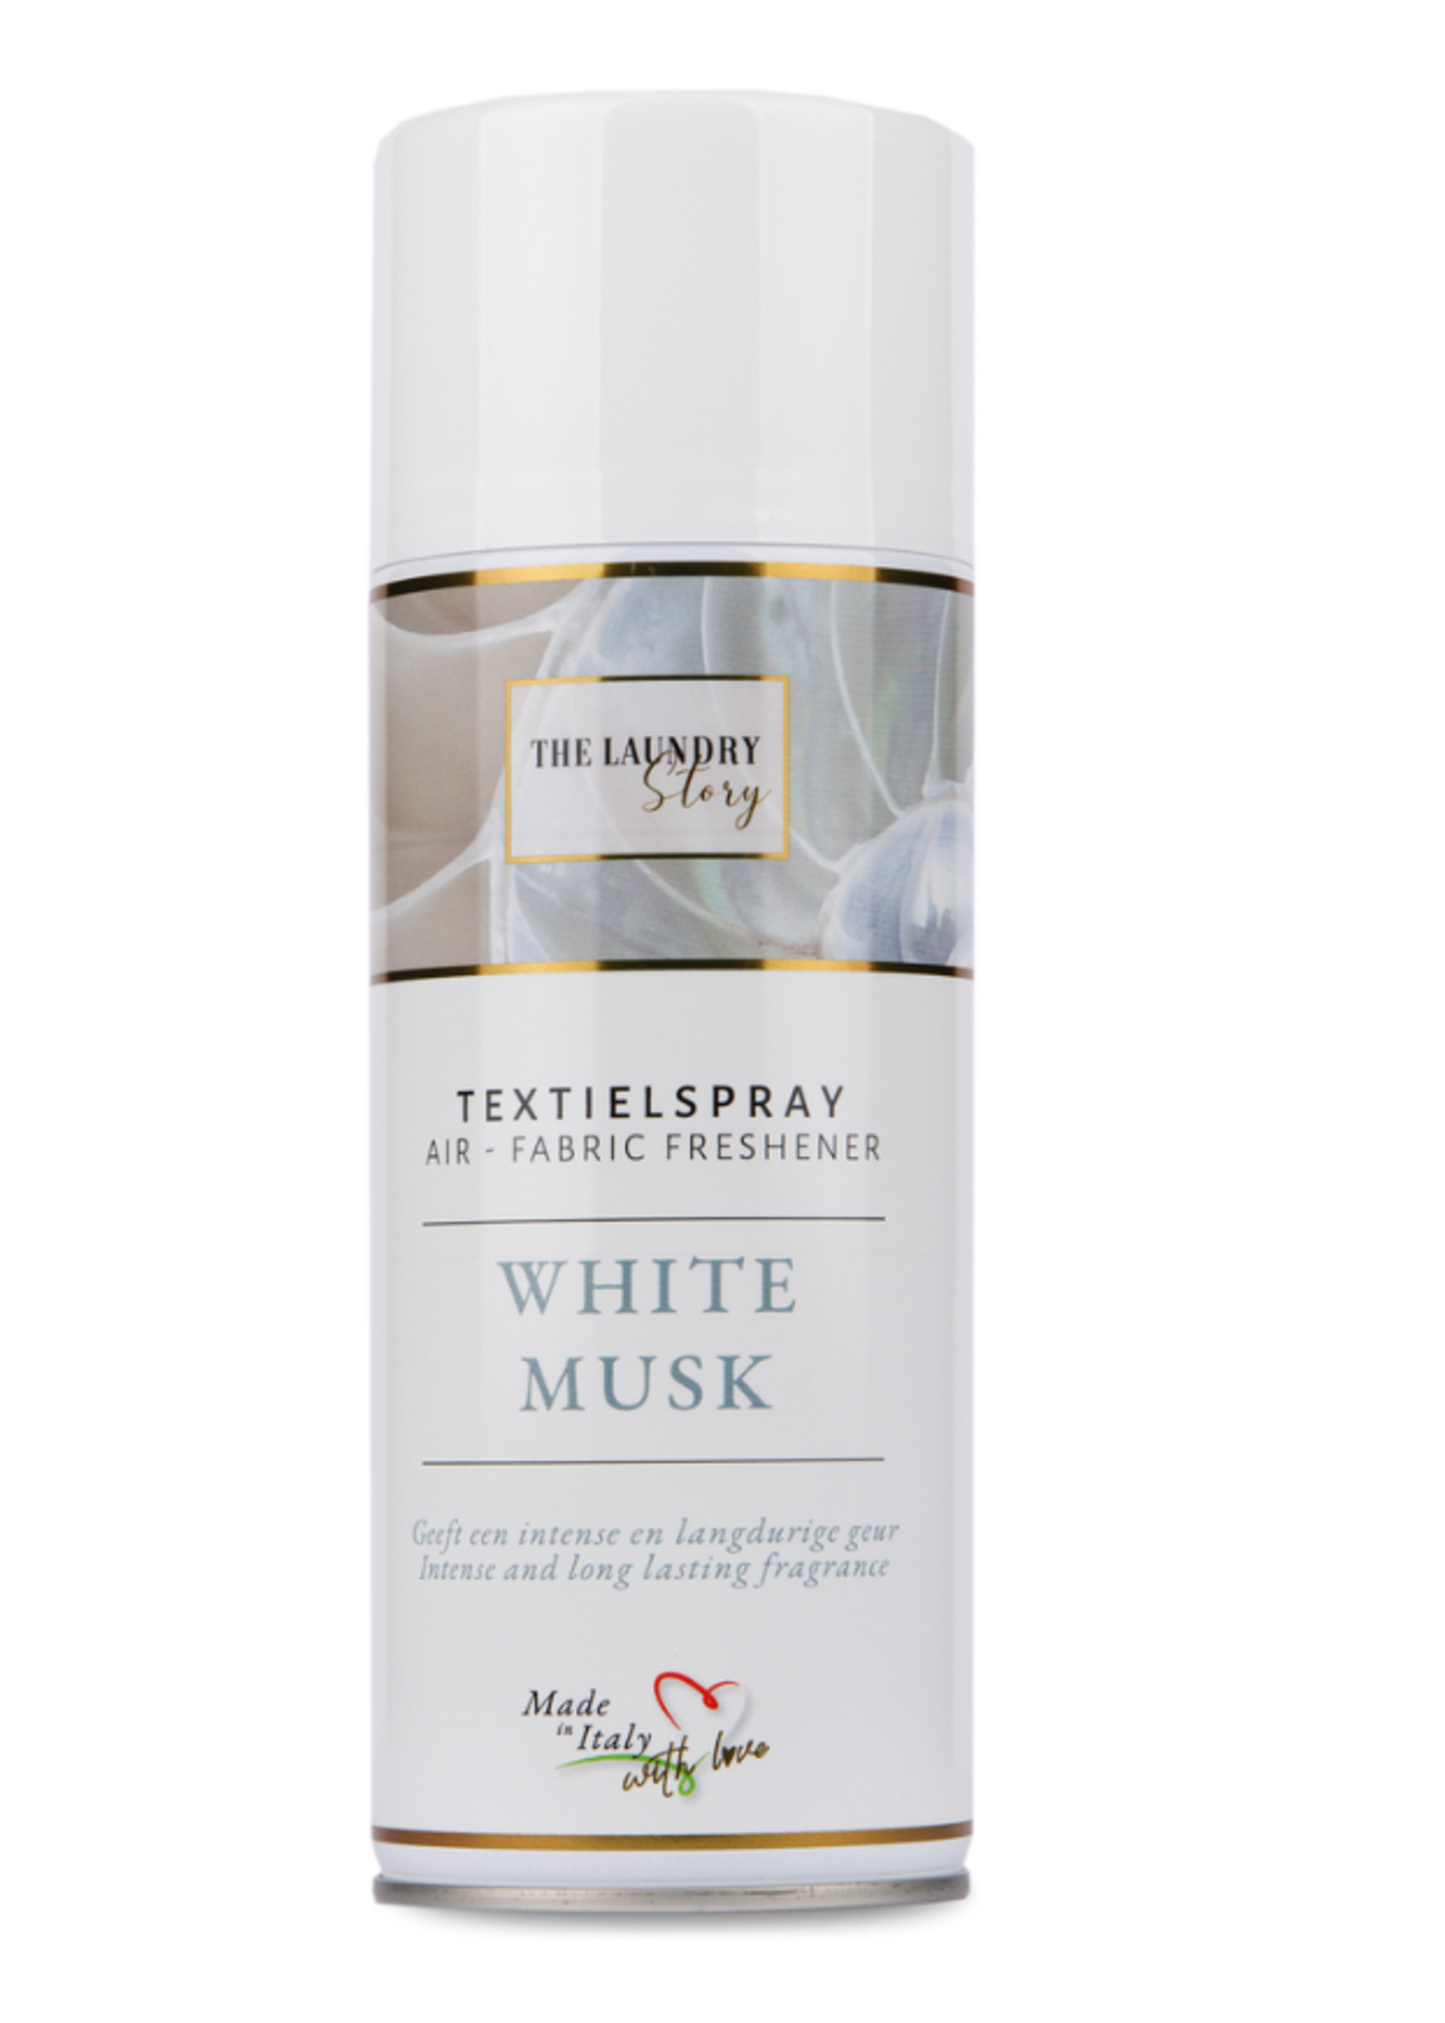 Textielspray | The Laundry Story ''White musk''